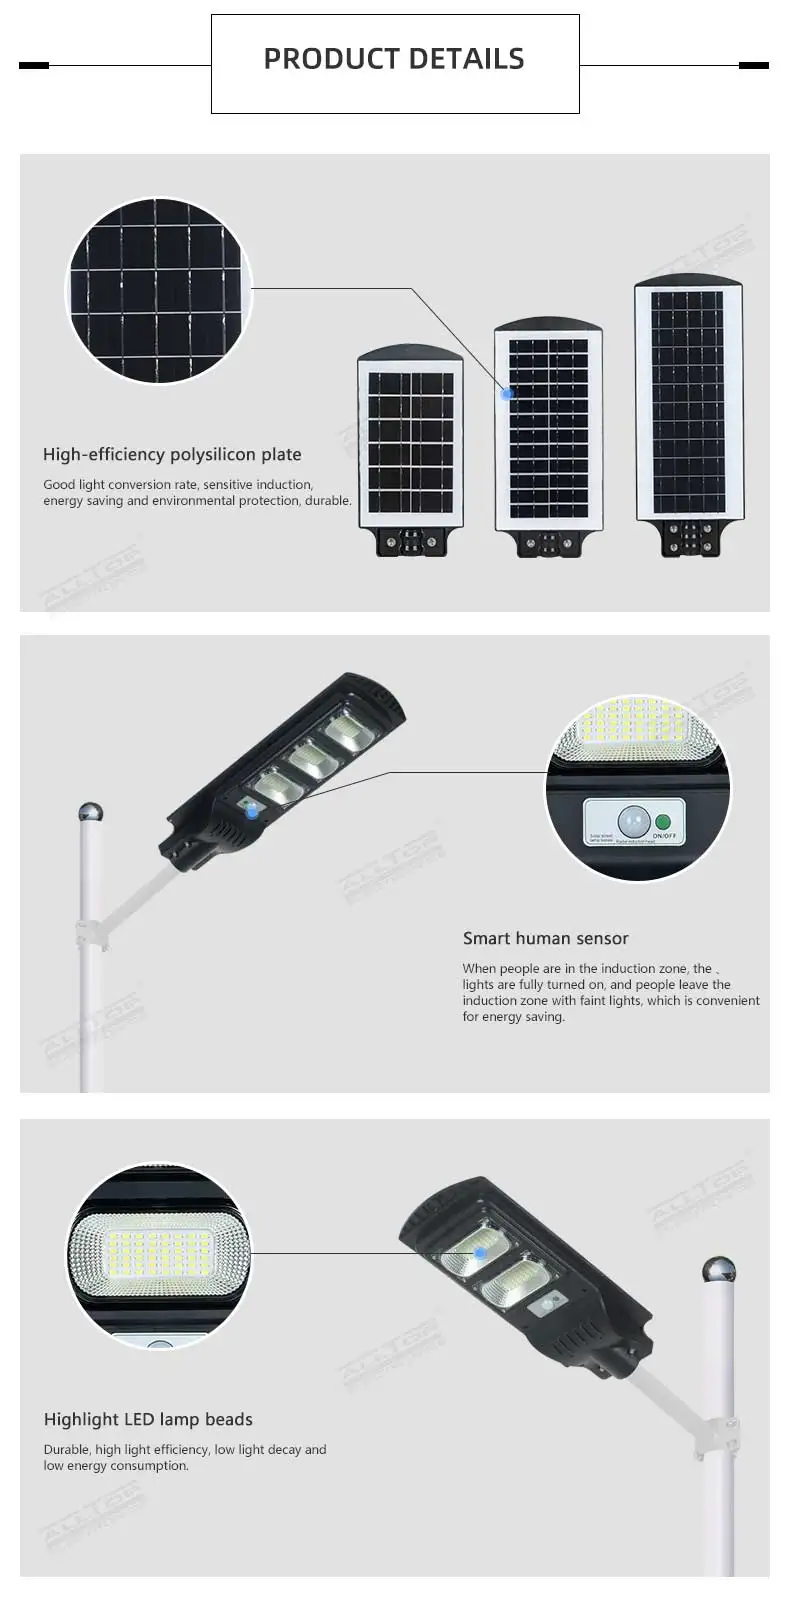 Factory direct sale outdoor waterproof ip65 30w 60w 90w all in one solar powered led street light